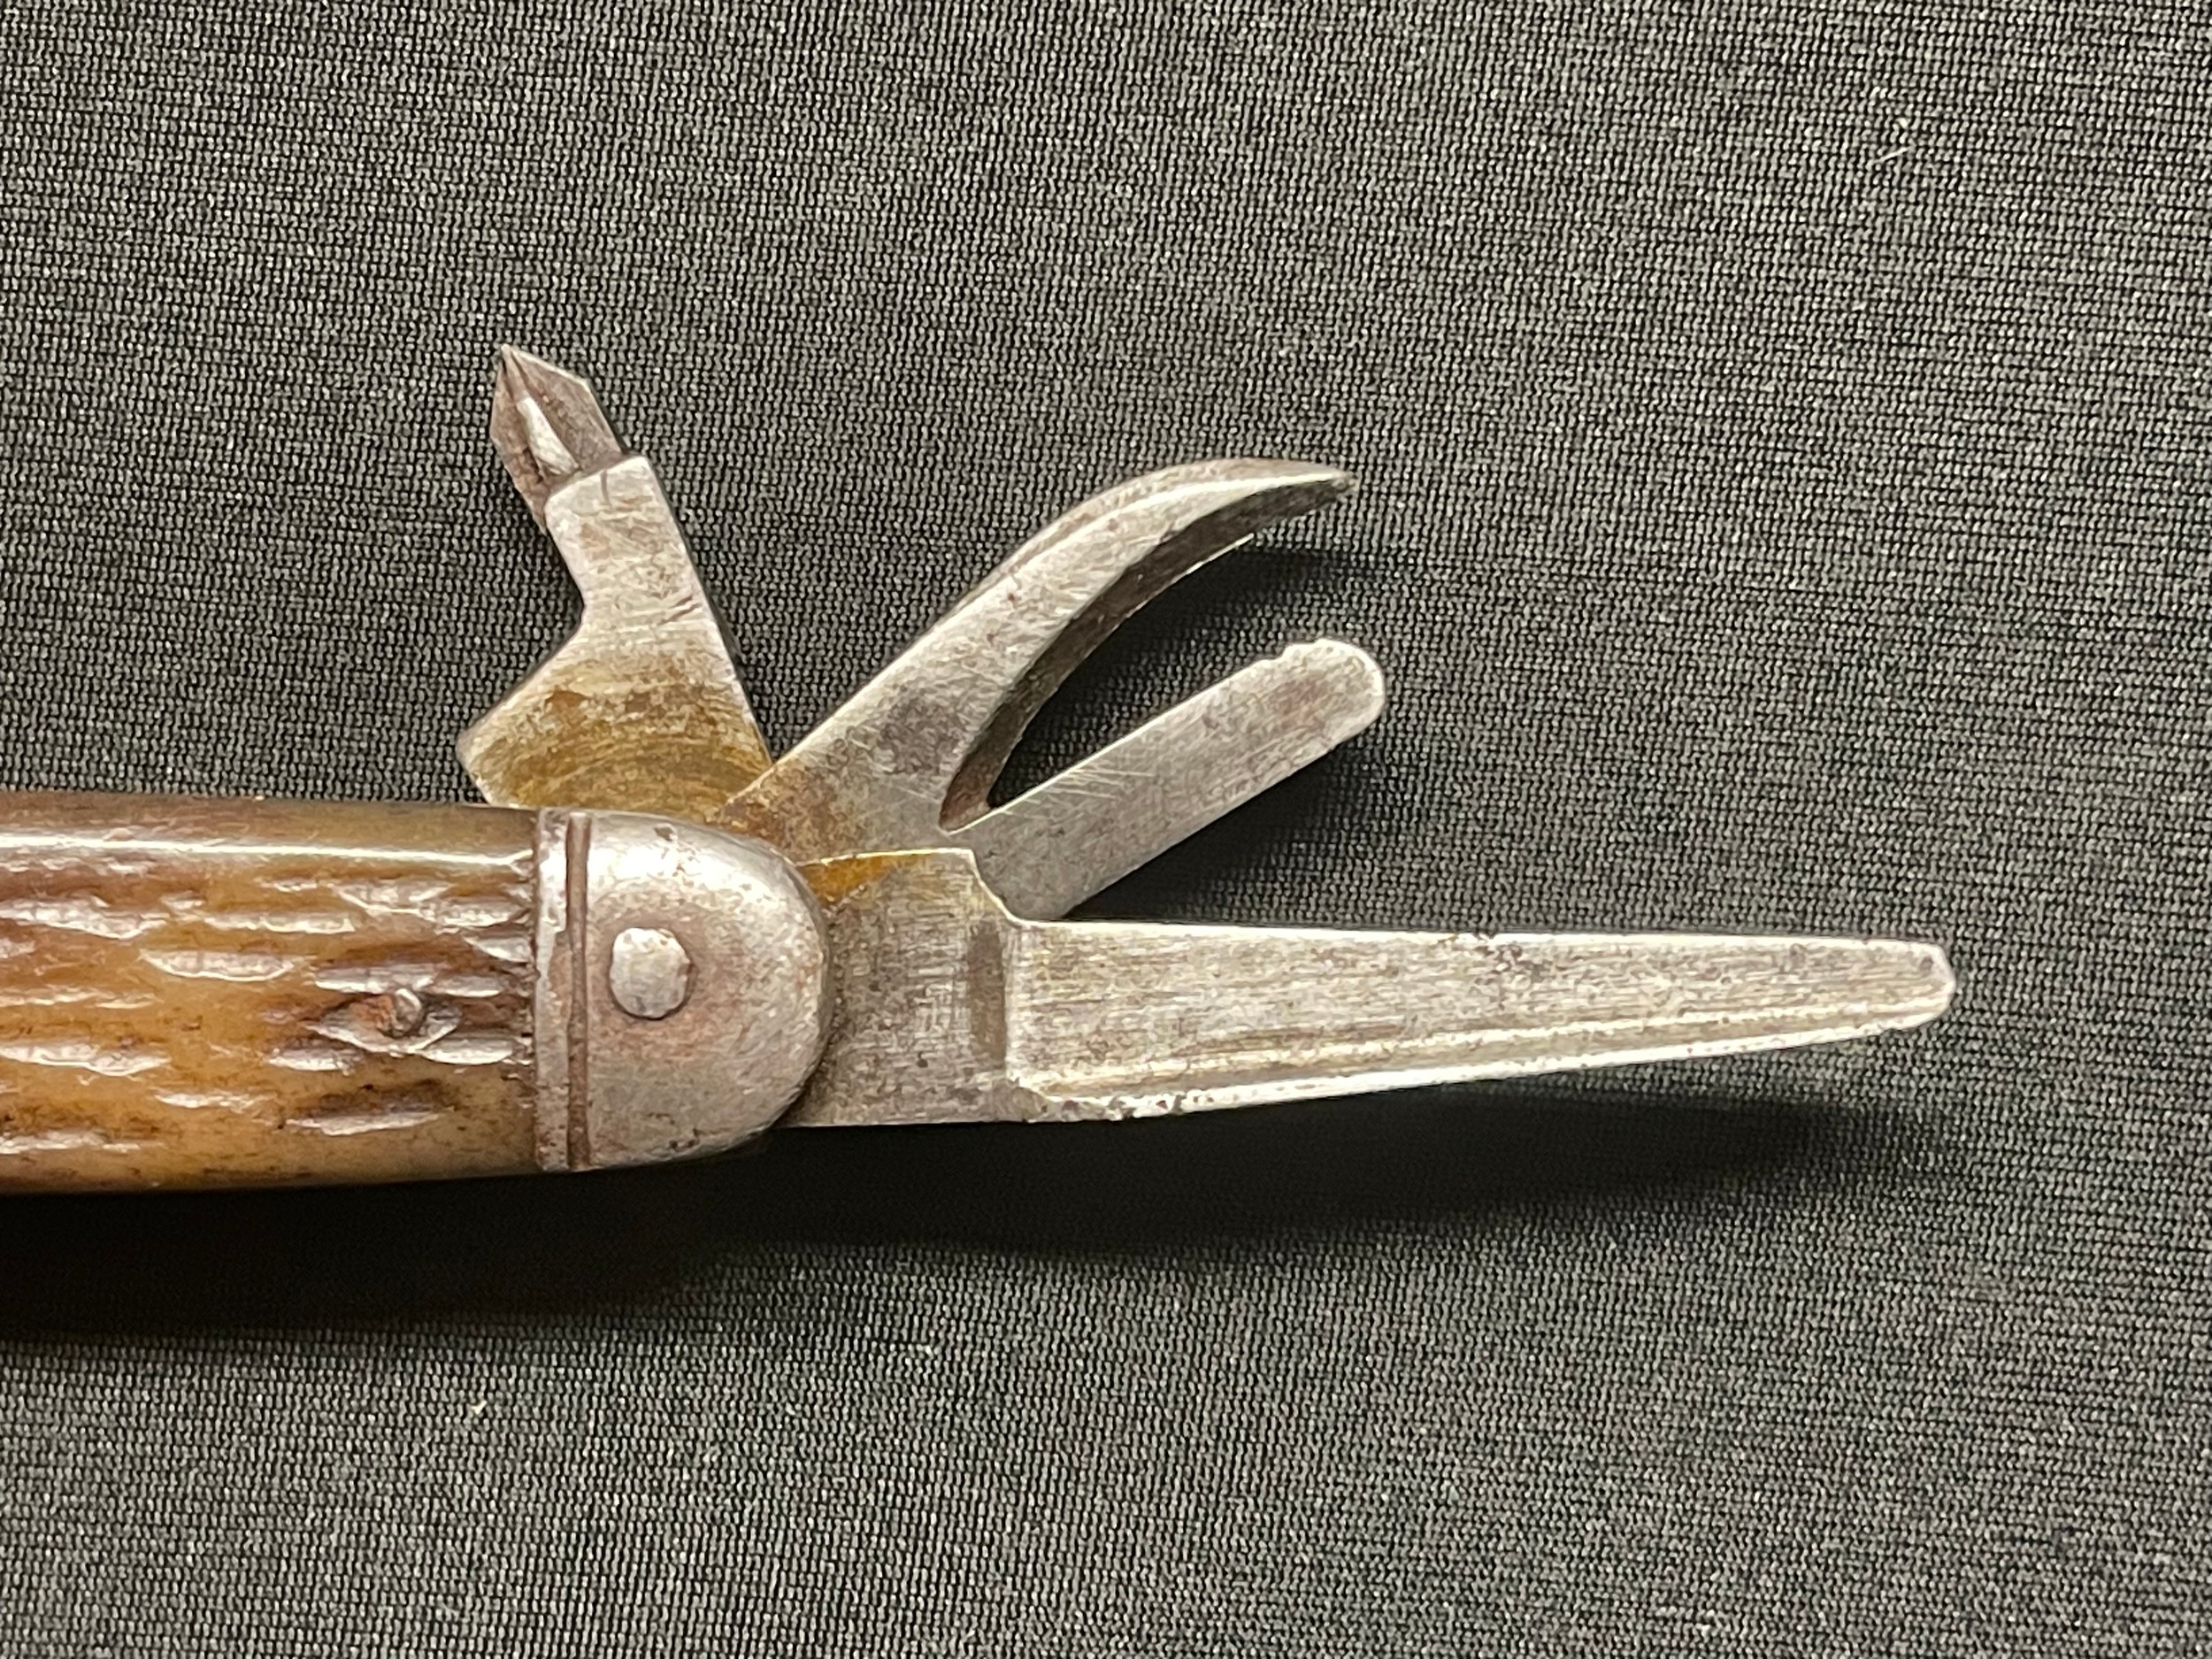 WW2 US Army multi tool penknife with two blades, 50mm and 25mm in length, tin opener, Phillips - Image 7 of 14